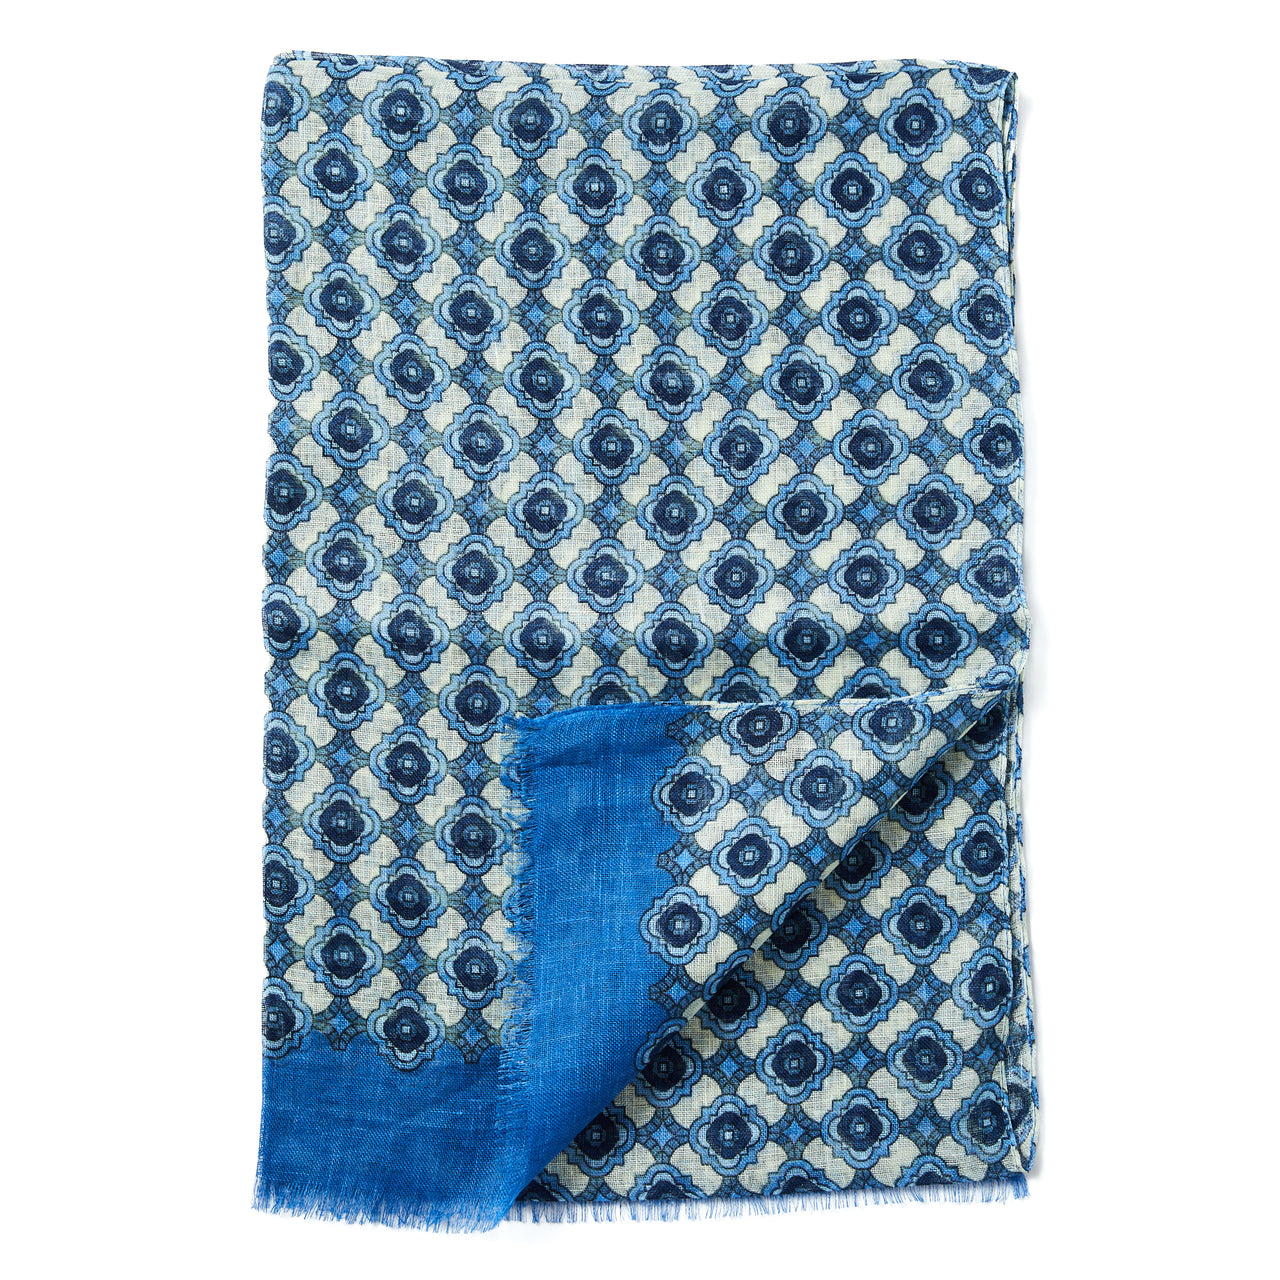 HENRY SARTORIAL x FLORENCE Linen Scarf BLUE